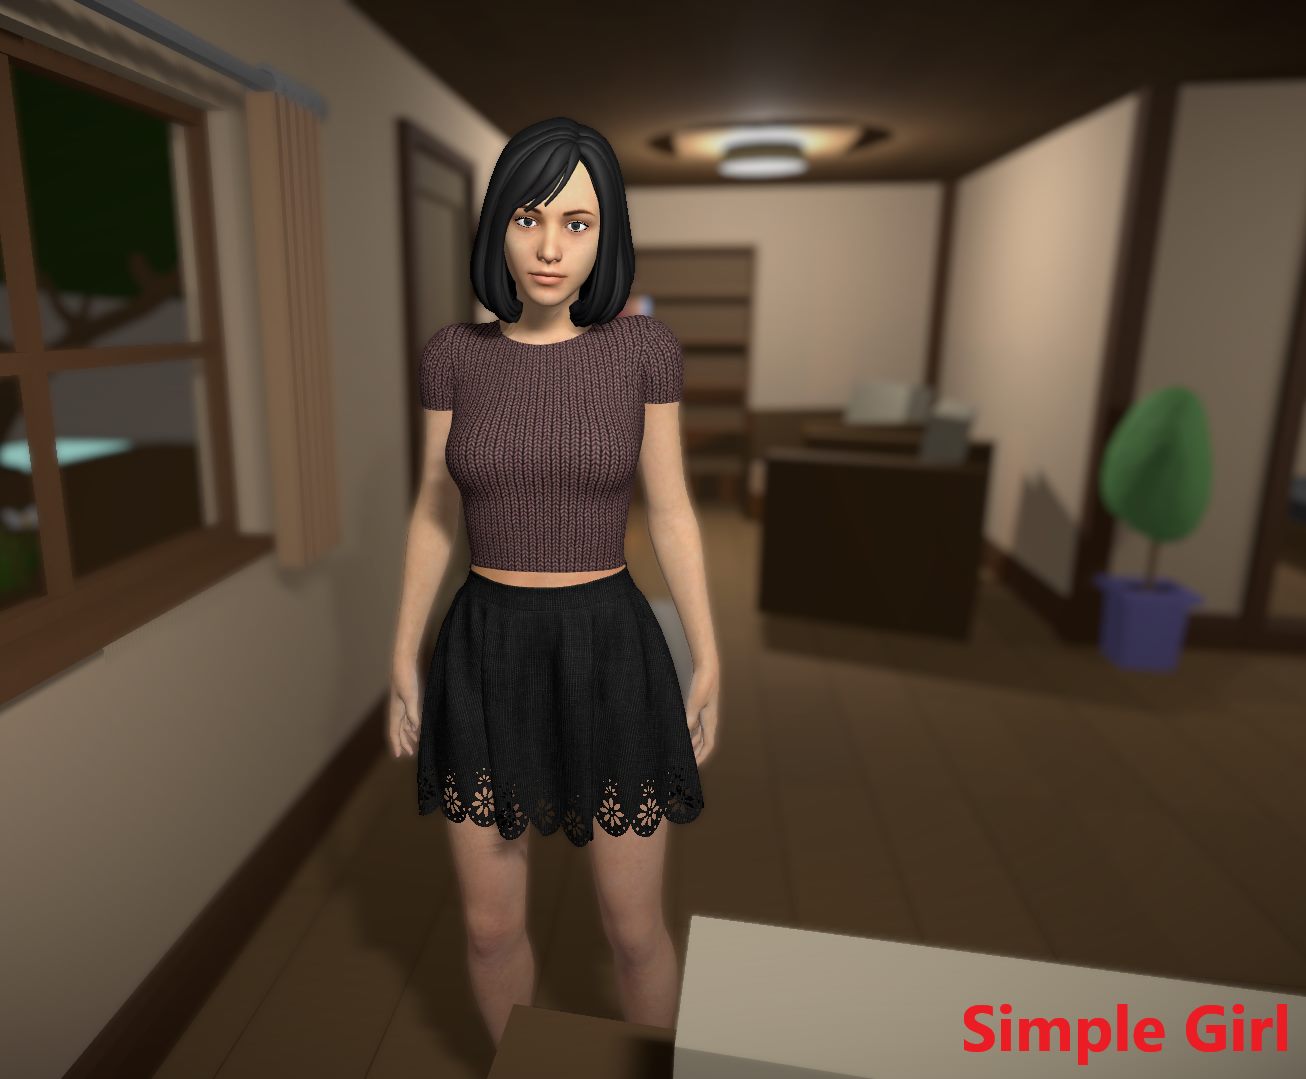 Xxx Garel - Simple Girl Unity Porn Sex Game v.1.39 Download for Windows, Android